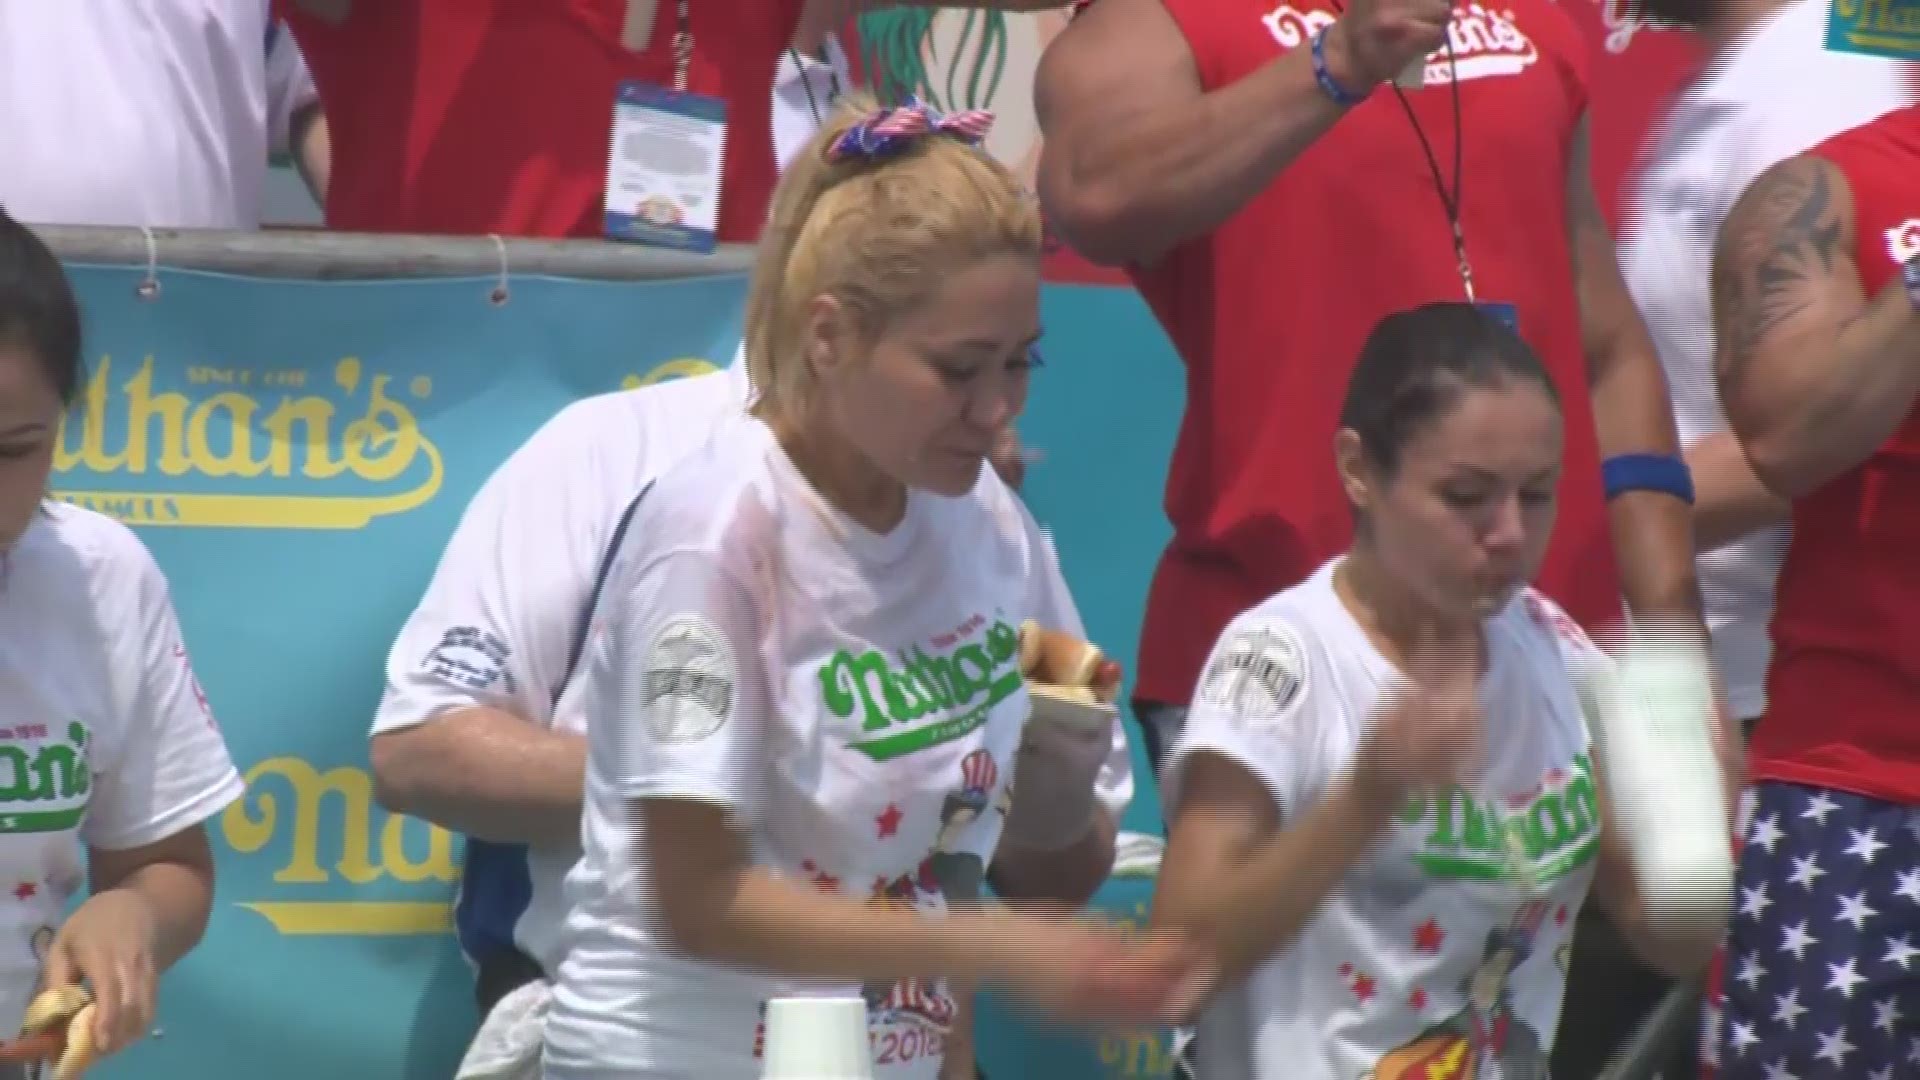 Joey Chestnut won the 2018 Nathan's Hot Dog Contest, his 11th victory and third in a row. On the women's side, Miki Sudo ate 37 hot dogs, winning her fifth straight title.